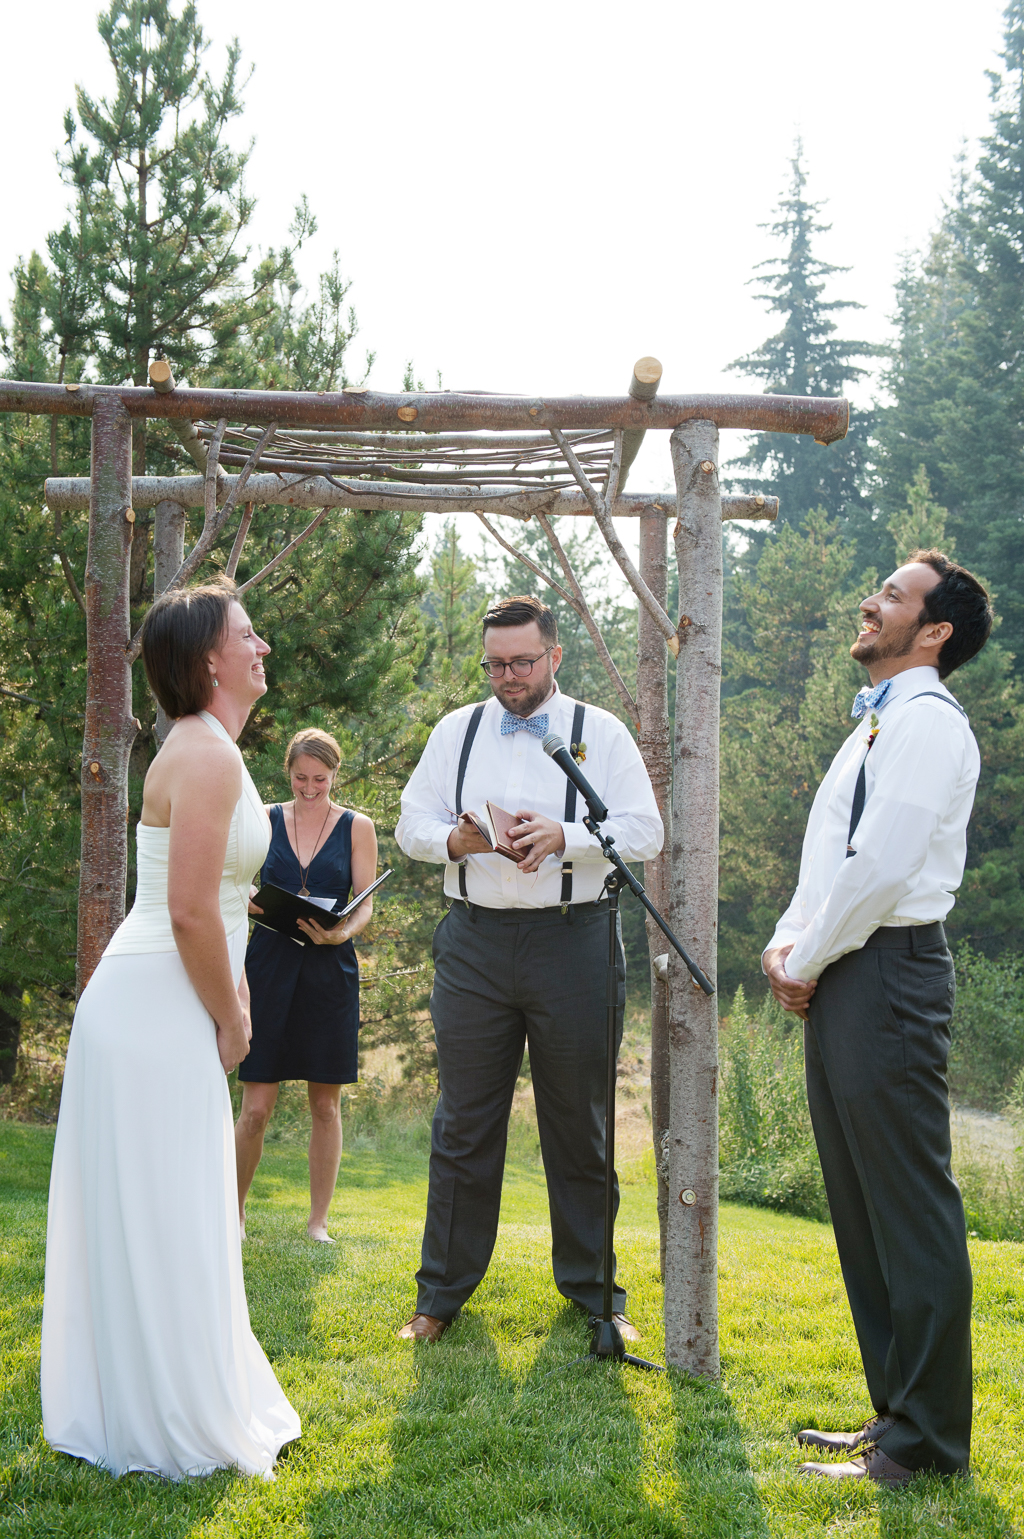 a bride and groom laugh during their vows in front of a wedding arbor made of logs